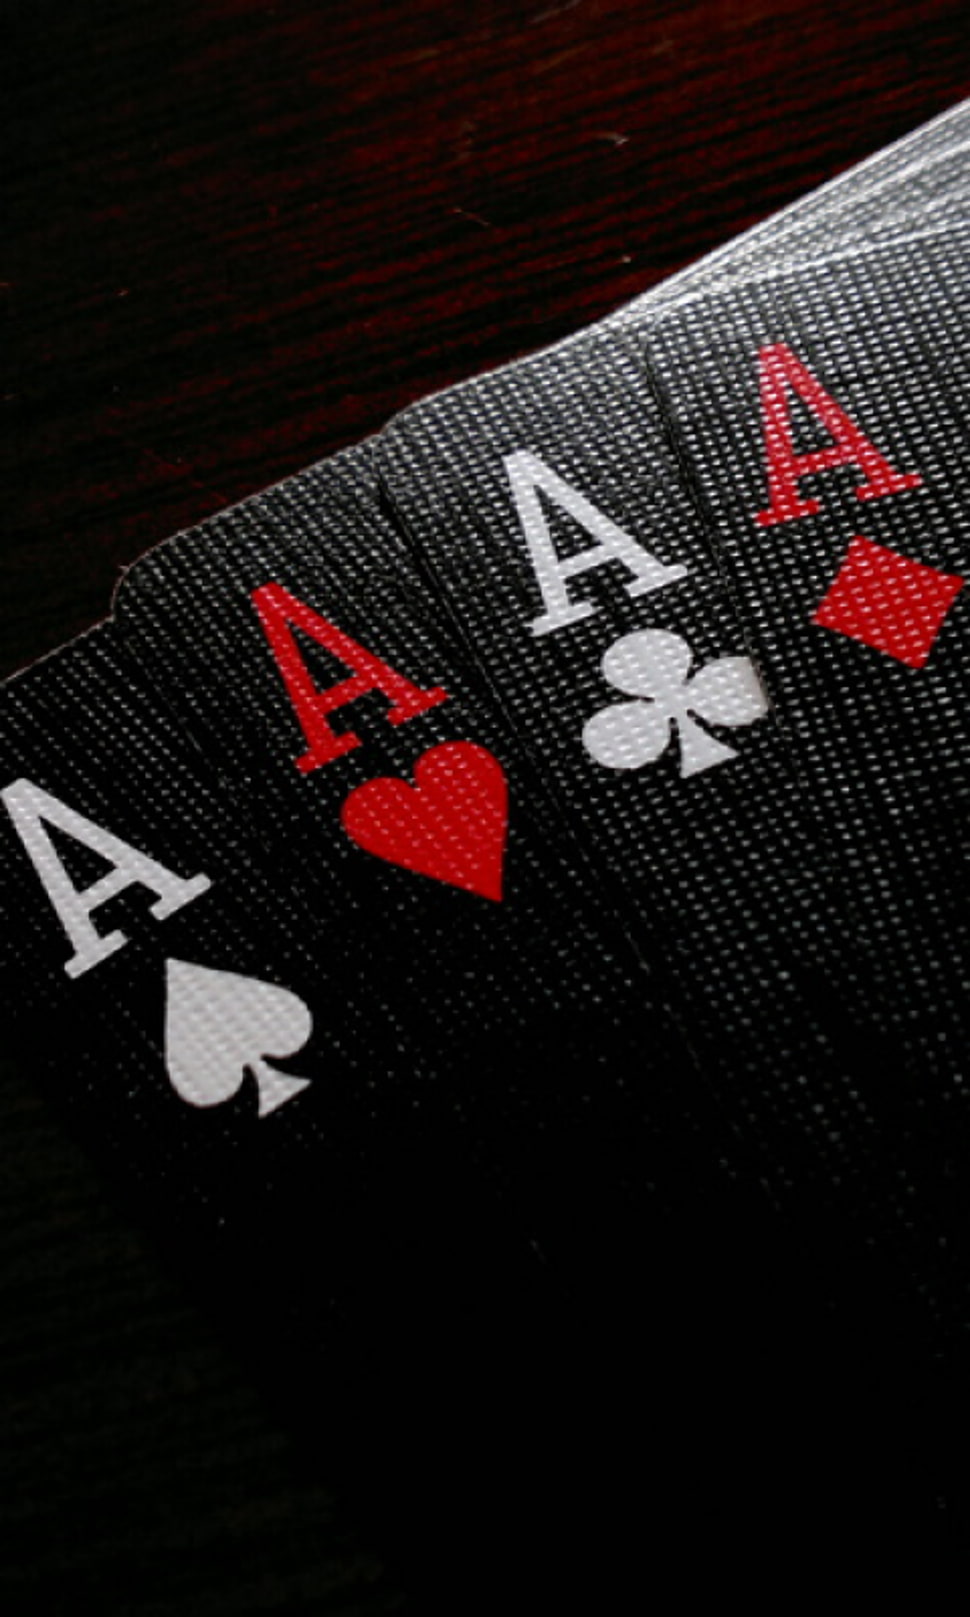 Ace of Spade, Heart, Clubs and Diamond playing cards photography ...